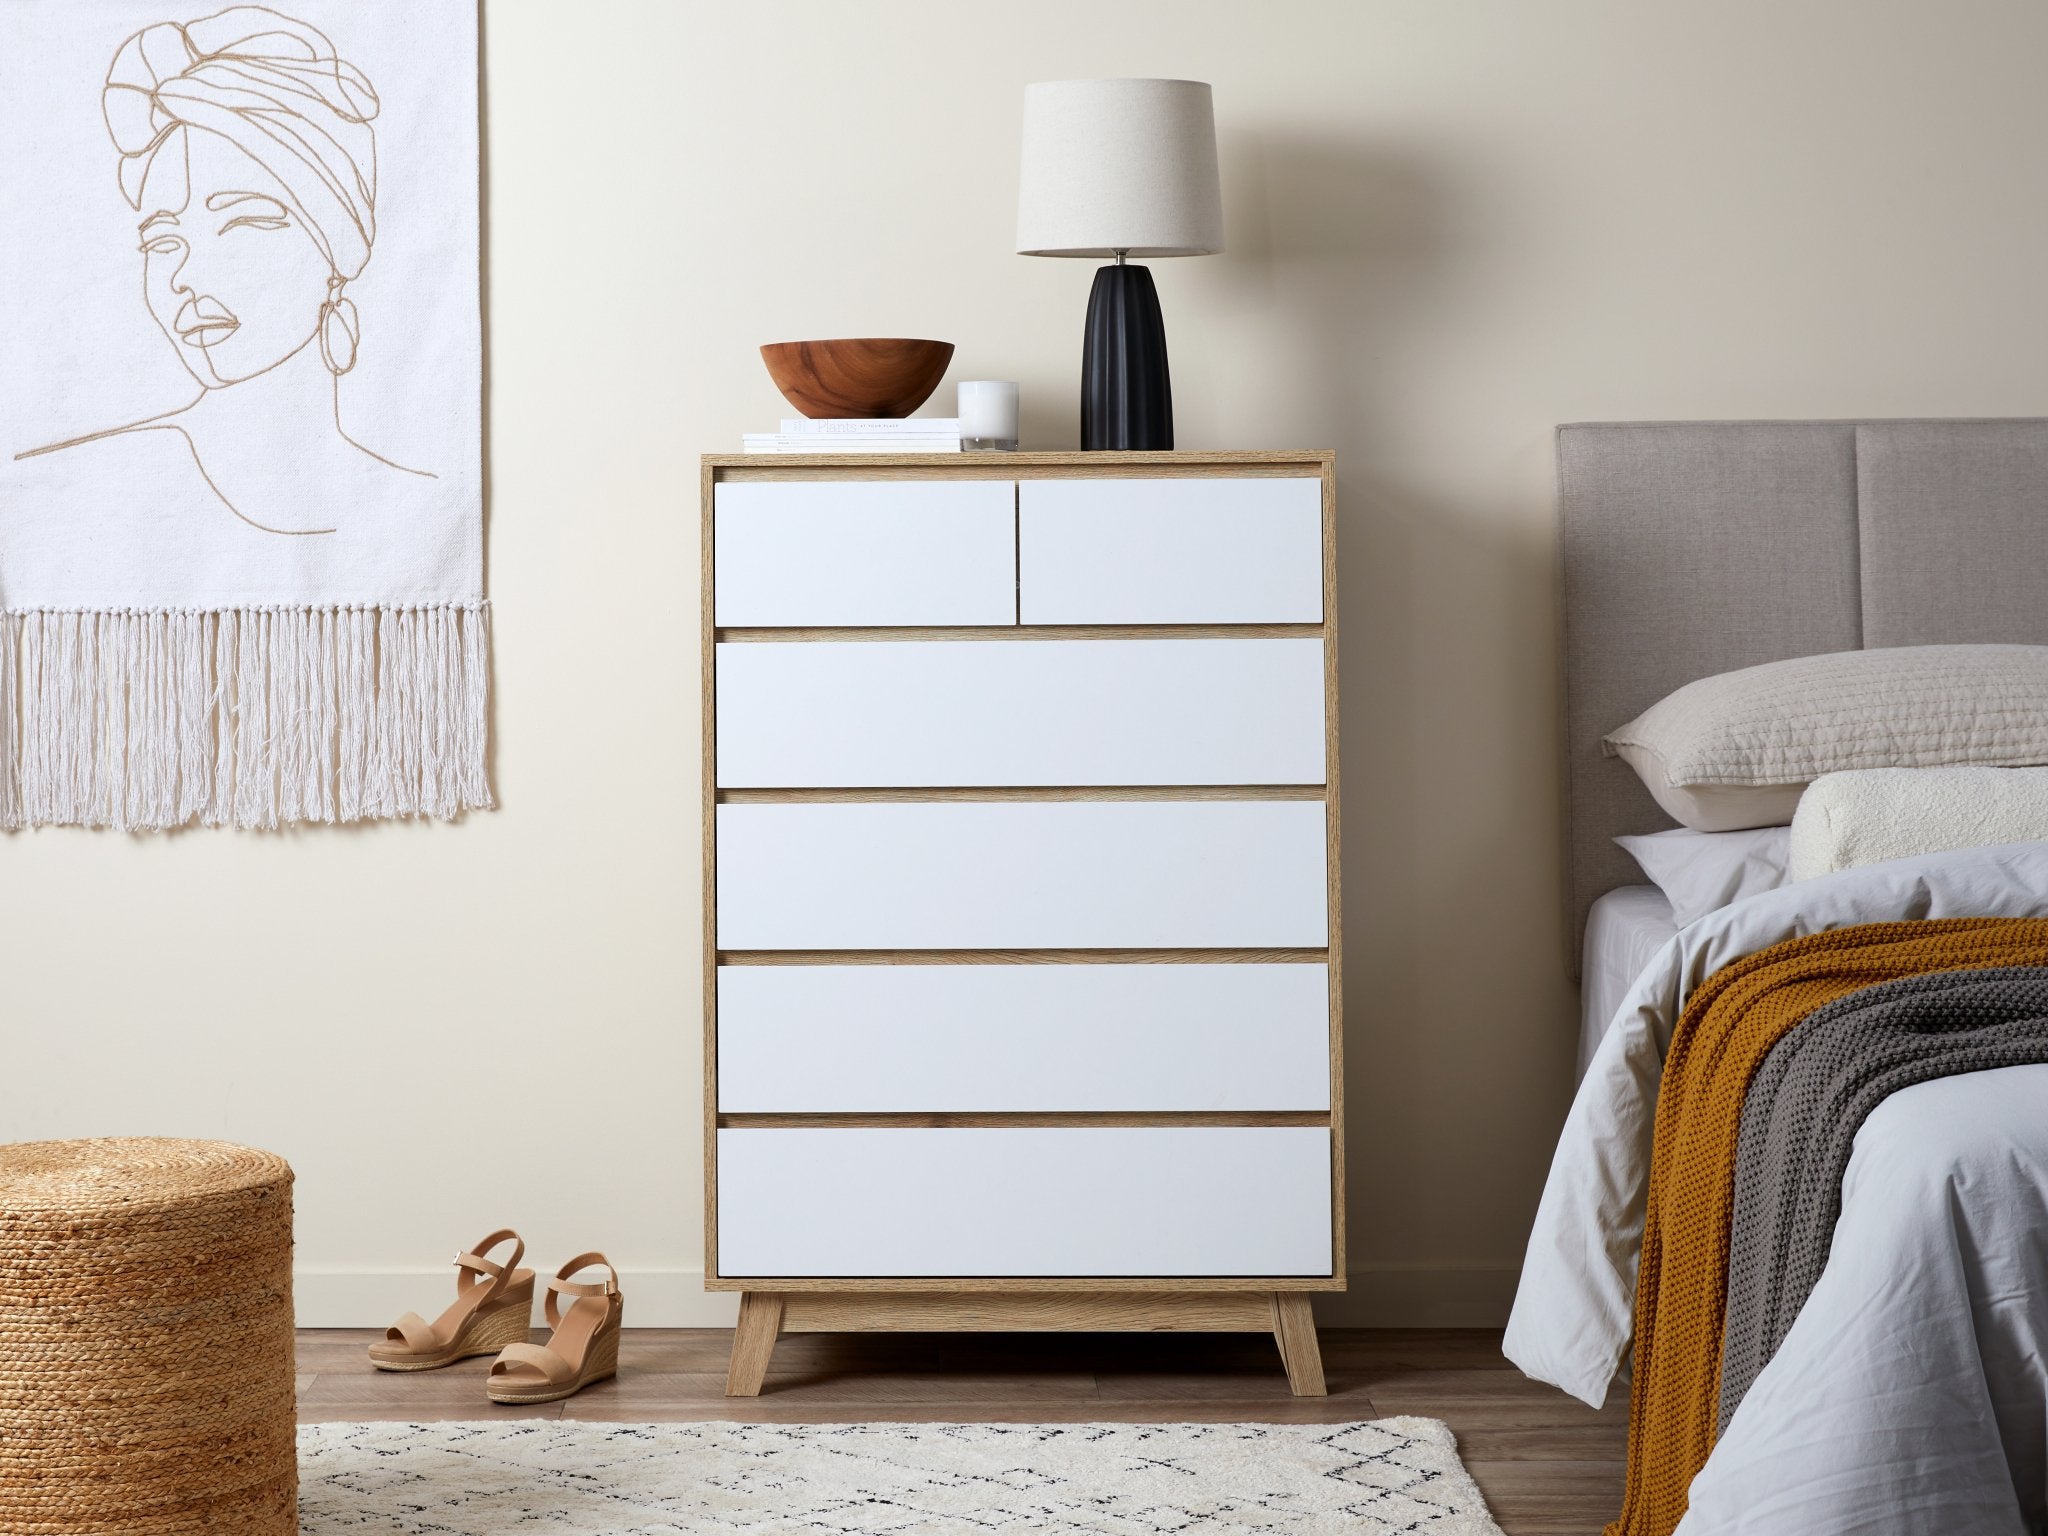 A Jesse wood look hallway stand with white drawers